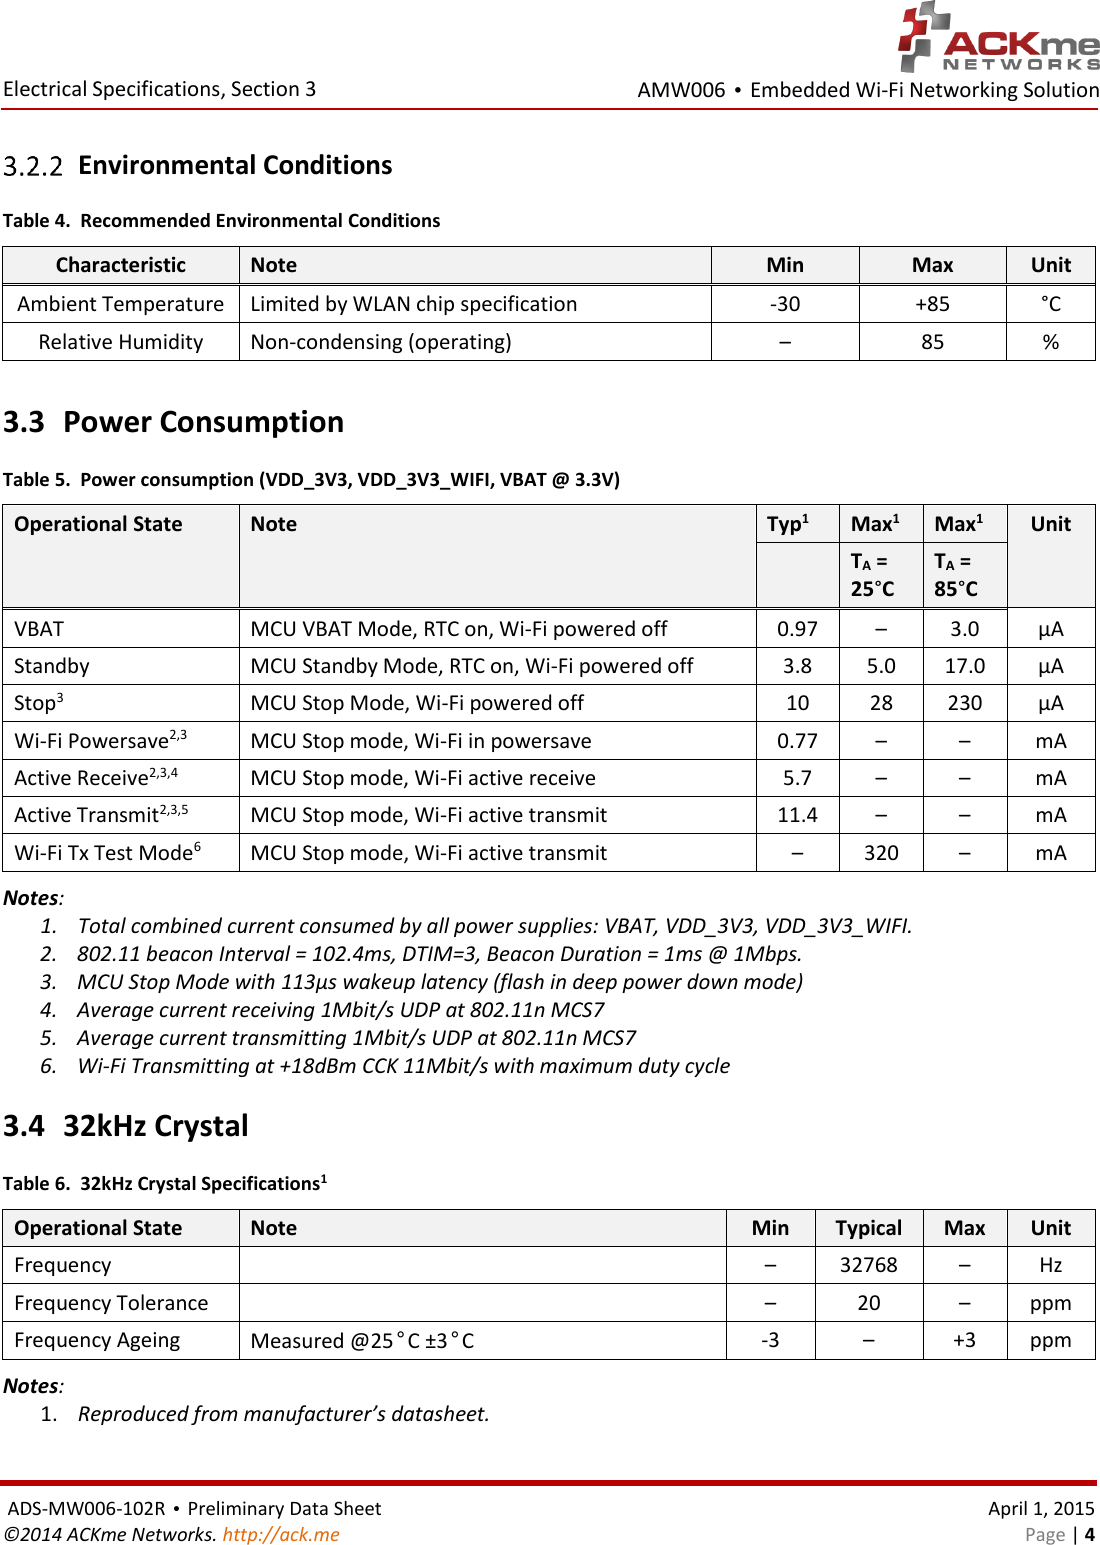 AMW006 • Embedded Wi-Fi Networking Solution  Electrical Specifications, Section 3  ADS-MW006-102R • Preliminary Data Sheet    April 1, 2015 ©2014 ACKme Networks. http://ack.me    Page | 4  Environmental Conditions Table 4.  Recommended Environmental Conditions Characteristic Note Min Max Unit Ambient Temperature Limited by WLAN chip specification -30 +85 °C Relative Humidity Non-condensing (operating) – 85 %  3.3 Power Consumption Table 5.  Power consumption (VDD_3V3, VDD_3V3_WIFI, VBAT @ 3.3V) Operational State Note Typ1 Max1 Max1 Unit  TA = 25°C TA = 85°C VBAT MCU VBAT Mode, RTC on, Wi-Fi powered off 0.97 – 3.0 µA Standby MCU Standby Mode, RTC on, Wi-Fi powered off 3.8 5.0 17.0 µA Stop3 MCU Stop Mode, Wi-Fi powered off 10 28 230 µA Wi-Fi Powersave2,3 MCU Stop mode, Wi-Fi in powersave 0.77 – – mA Active Receive2,3,4 MCU Stop mode, Wi-Fi active receive 5.7 – – mA Active Transmit2,3,5 MCU Stop mode, Wi-Fi active transmit 11.4 – – mA Wi-Fi Tx Test Mode6 MCU Stop mode, Wi-Fi active transmit – 320 – mA Notes: 1. Total combined current consumed by all power supplies: VBAT, VDD_3V3, VDD_3V3_WIFI. 2. 802.11 beacon Interval = 102.4ms, DTIM=3, Beacon Duration = 1ms @ 1Mbps.  3. MCU Stop Mode with 113µs wakeup latency (flash in deep power down mode) 4. Average current receiving 1Mbit/s UDP at 802.11n MCS7 5. Average current transmitting 1Mbit/s UDP at 802.11n MCS7 6. Wi-Fi Transmitting at +18dBm CCK 11Mbit/s with maximum duty cycle 3.4 32kHz Crystal Table 6.  32kHz Crystal Specifications1 Operational State Note Min Typical Max Unit Frequency  – 32768 – Hz Frequency Tolerance  – 20 – ppm Frequency Ageing Measured @25°C ±3°C -3 – +3 ppm Notes: 1. Reproduced from manufacturer’s datasheet.  